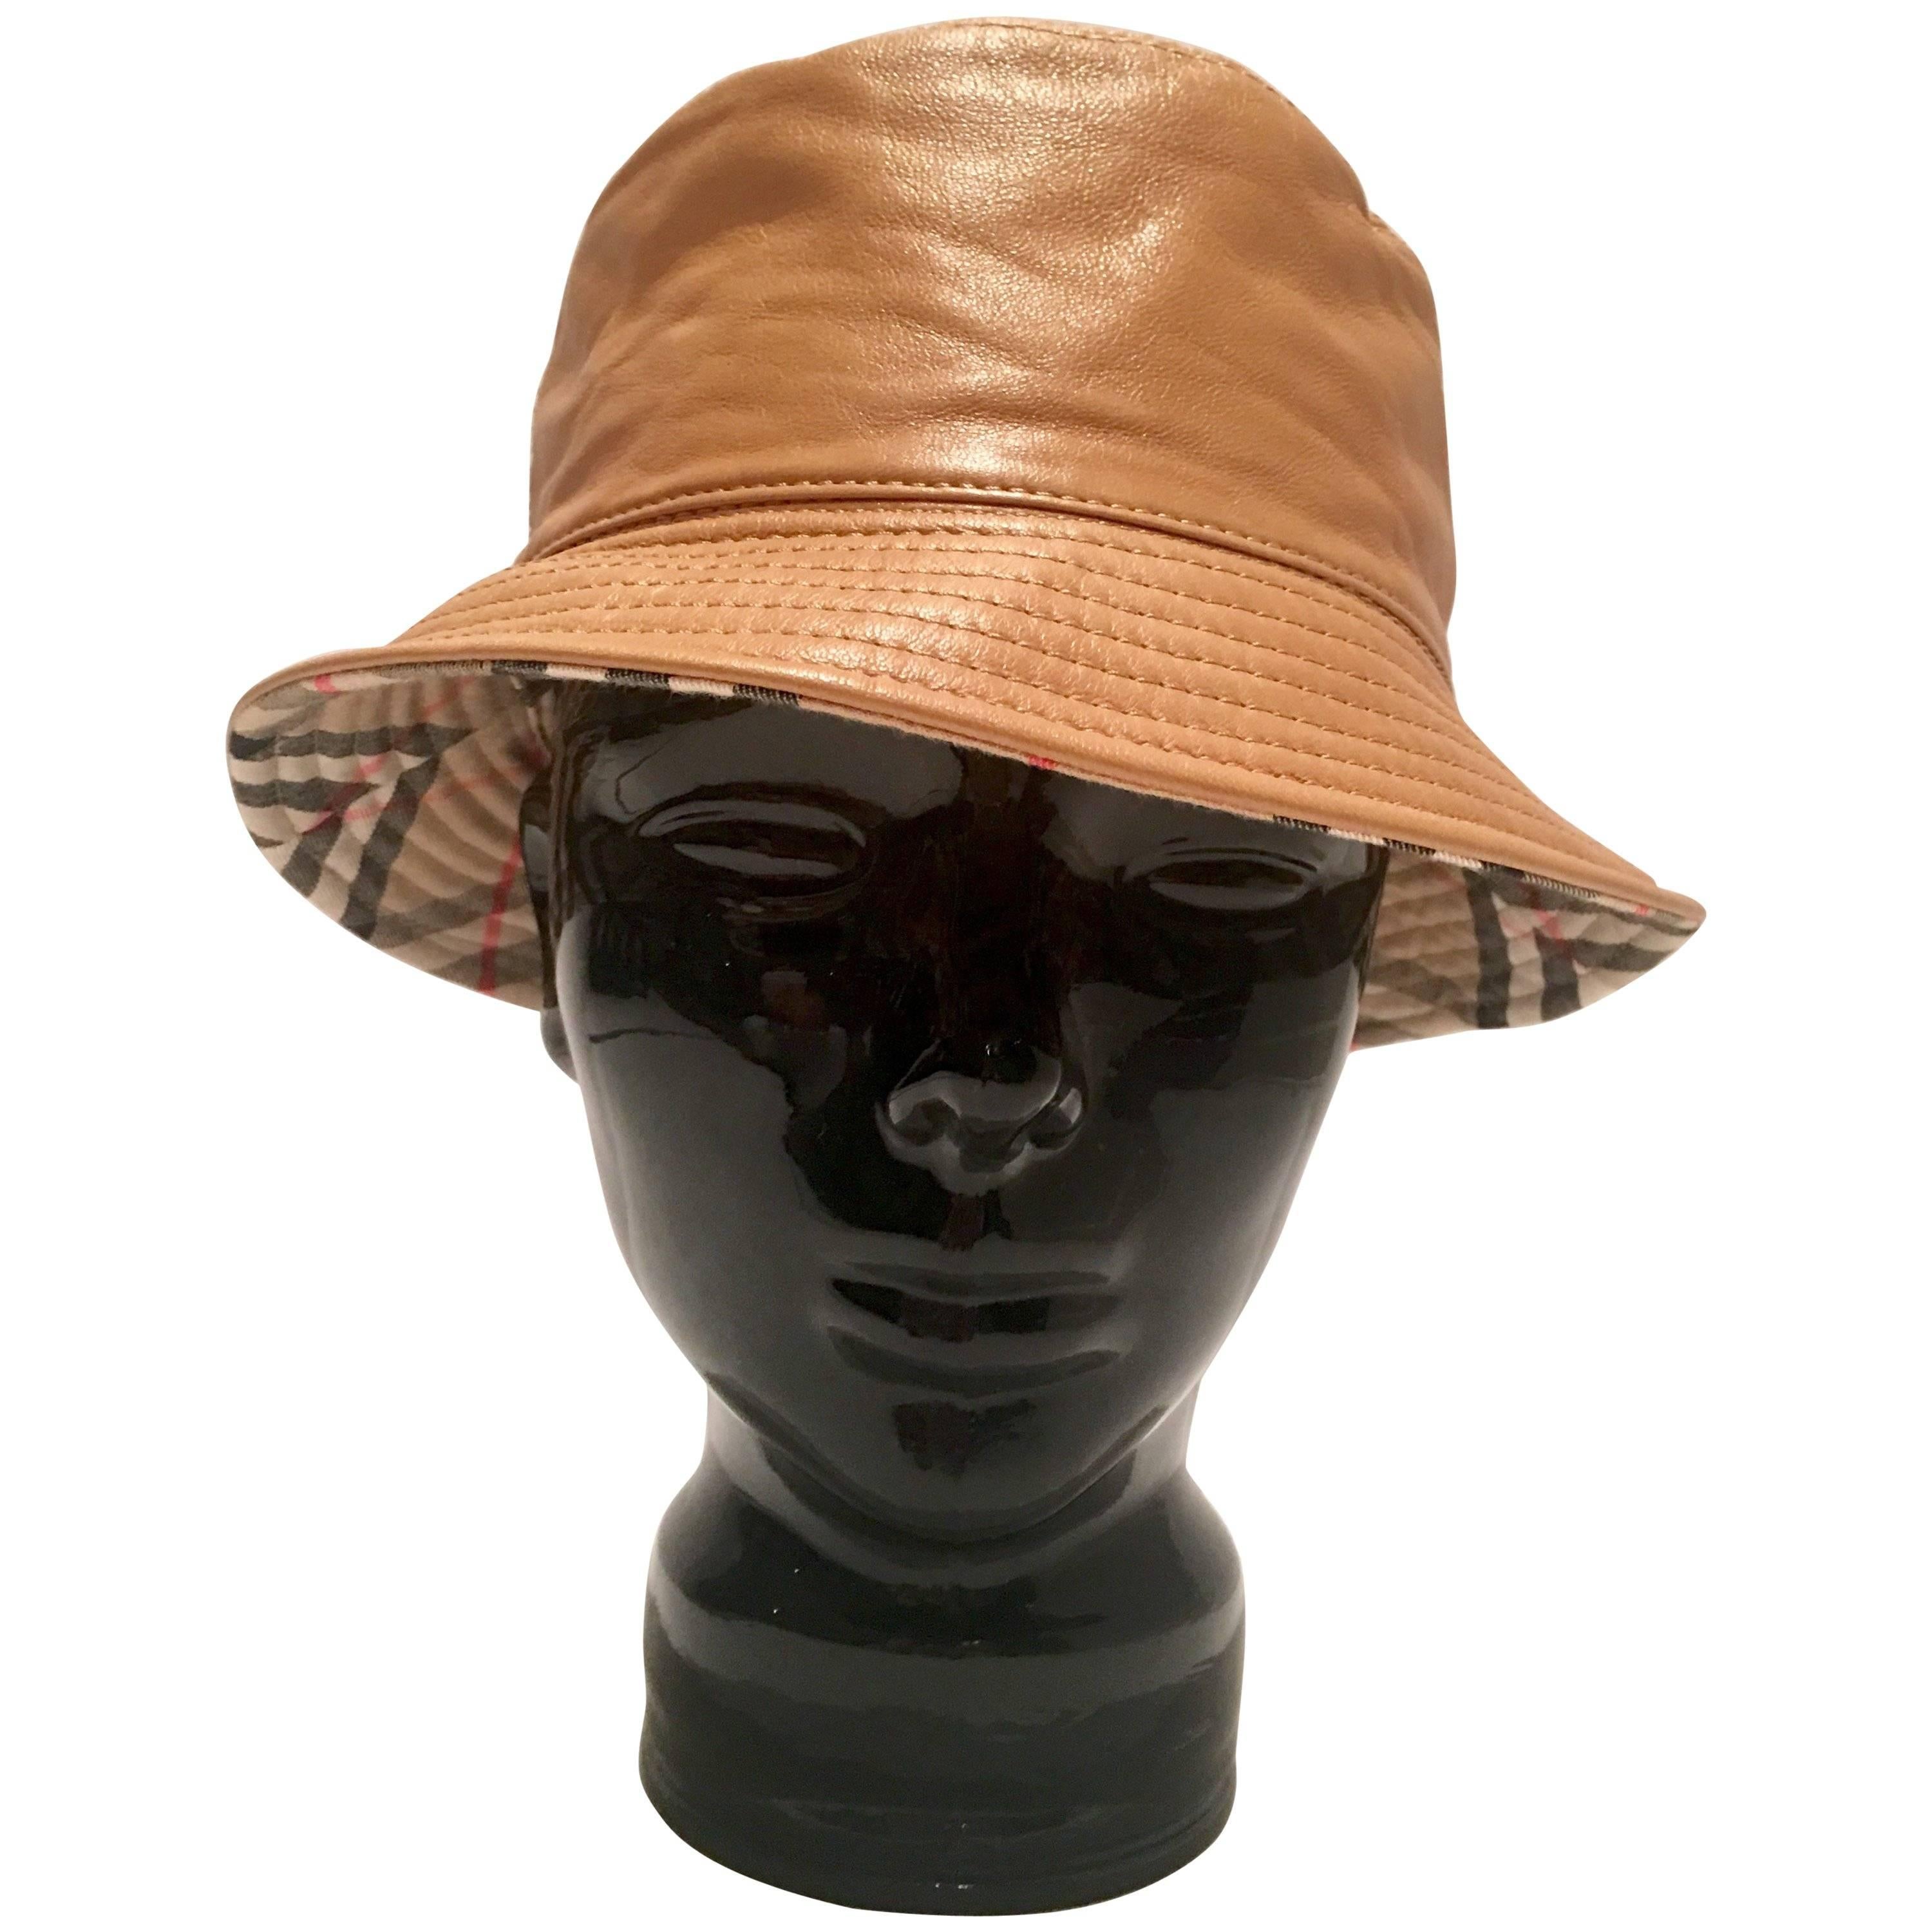 Burberry Camel Leather and Check "Bucket" Hat